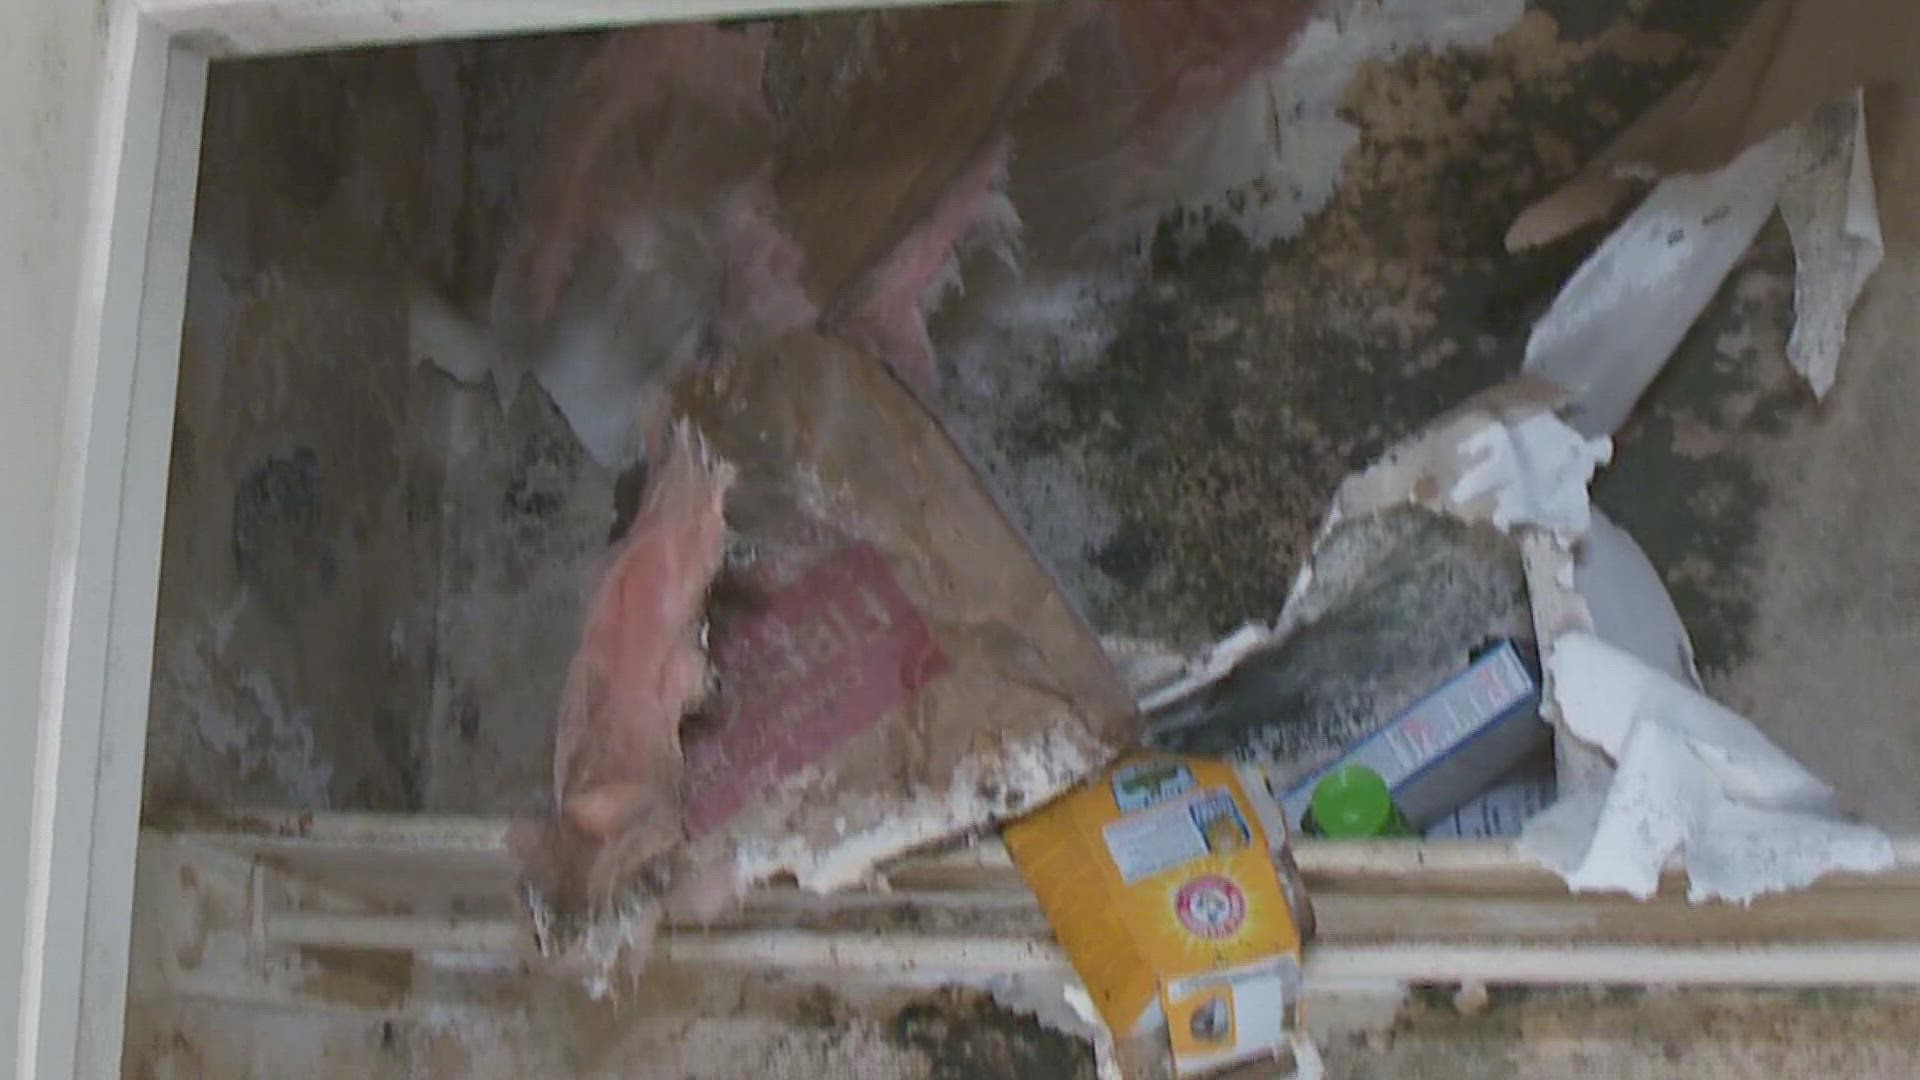 Marvett Johnson says the mold in her apartment has gotten so bad she has to sleep in the living room.